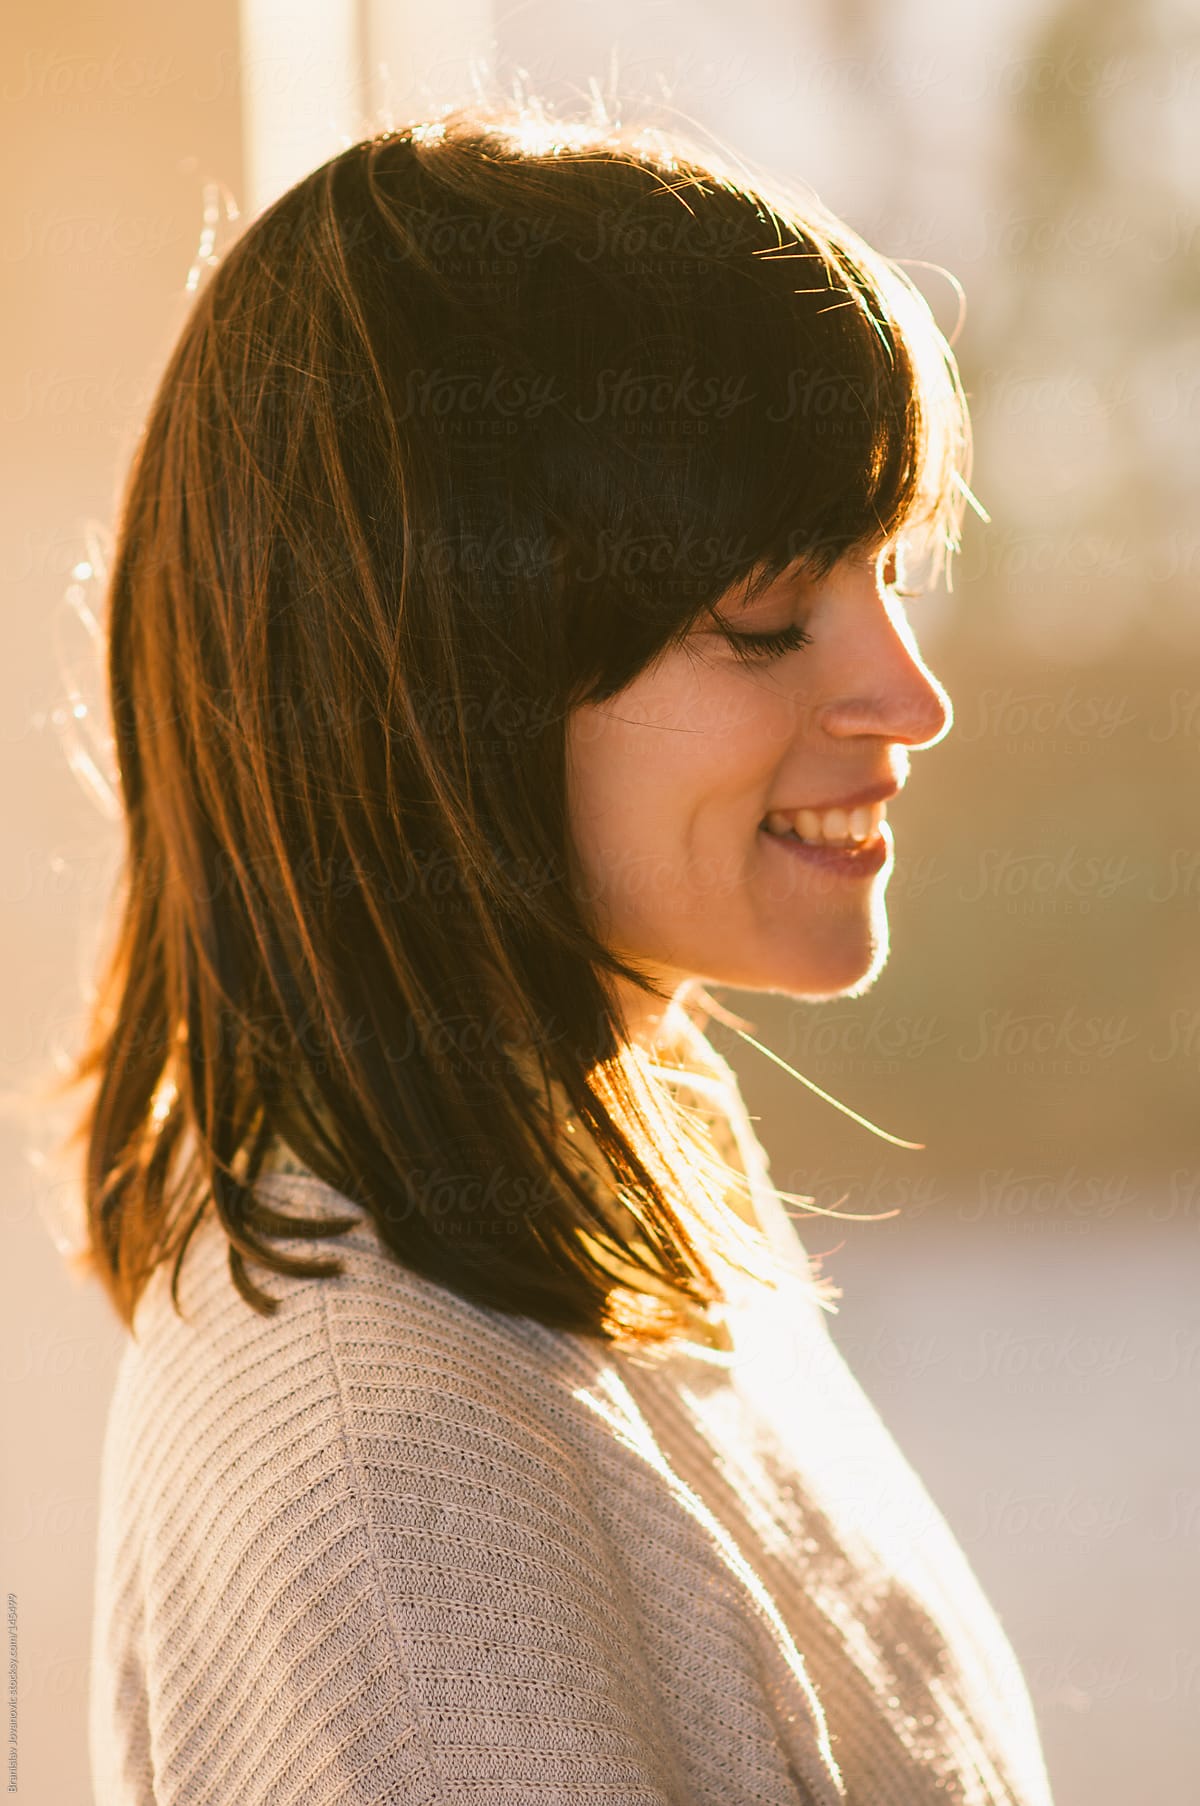 Portrait Of Smiling Brunette Woman By Stocksy Contributor Brkati